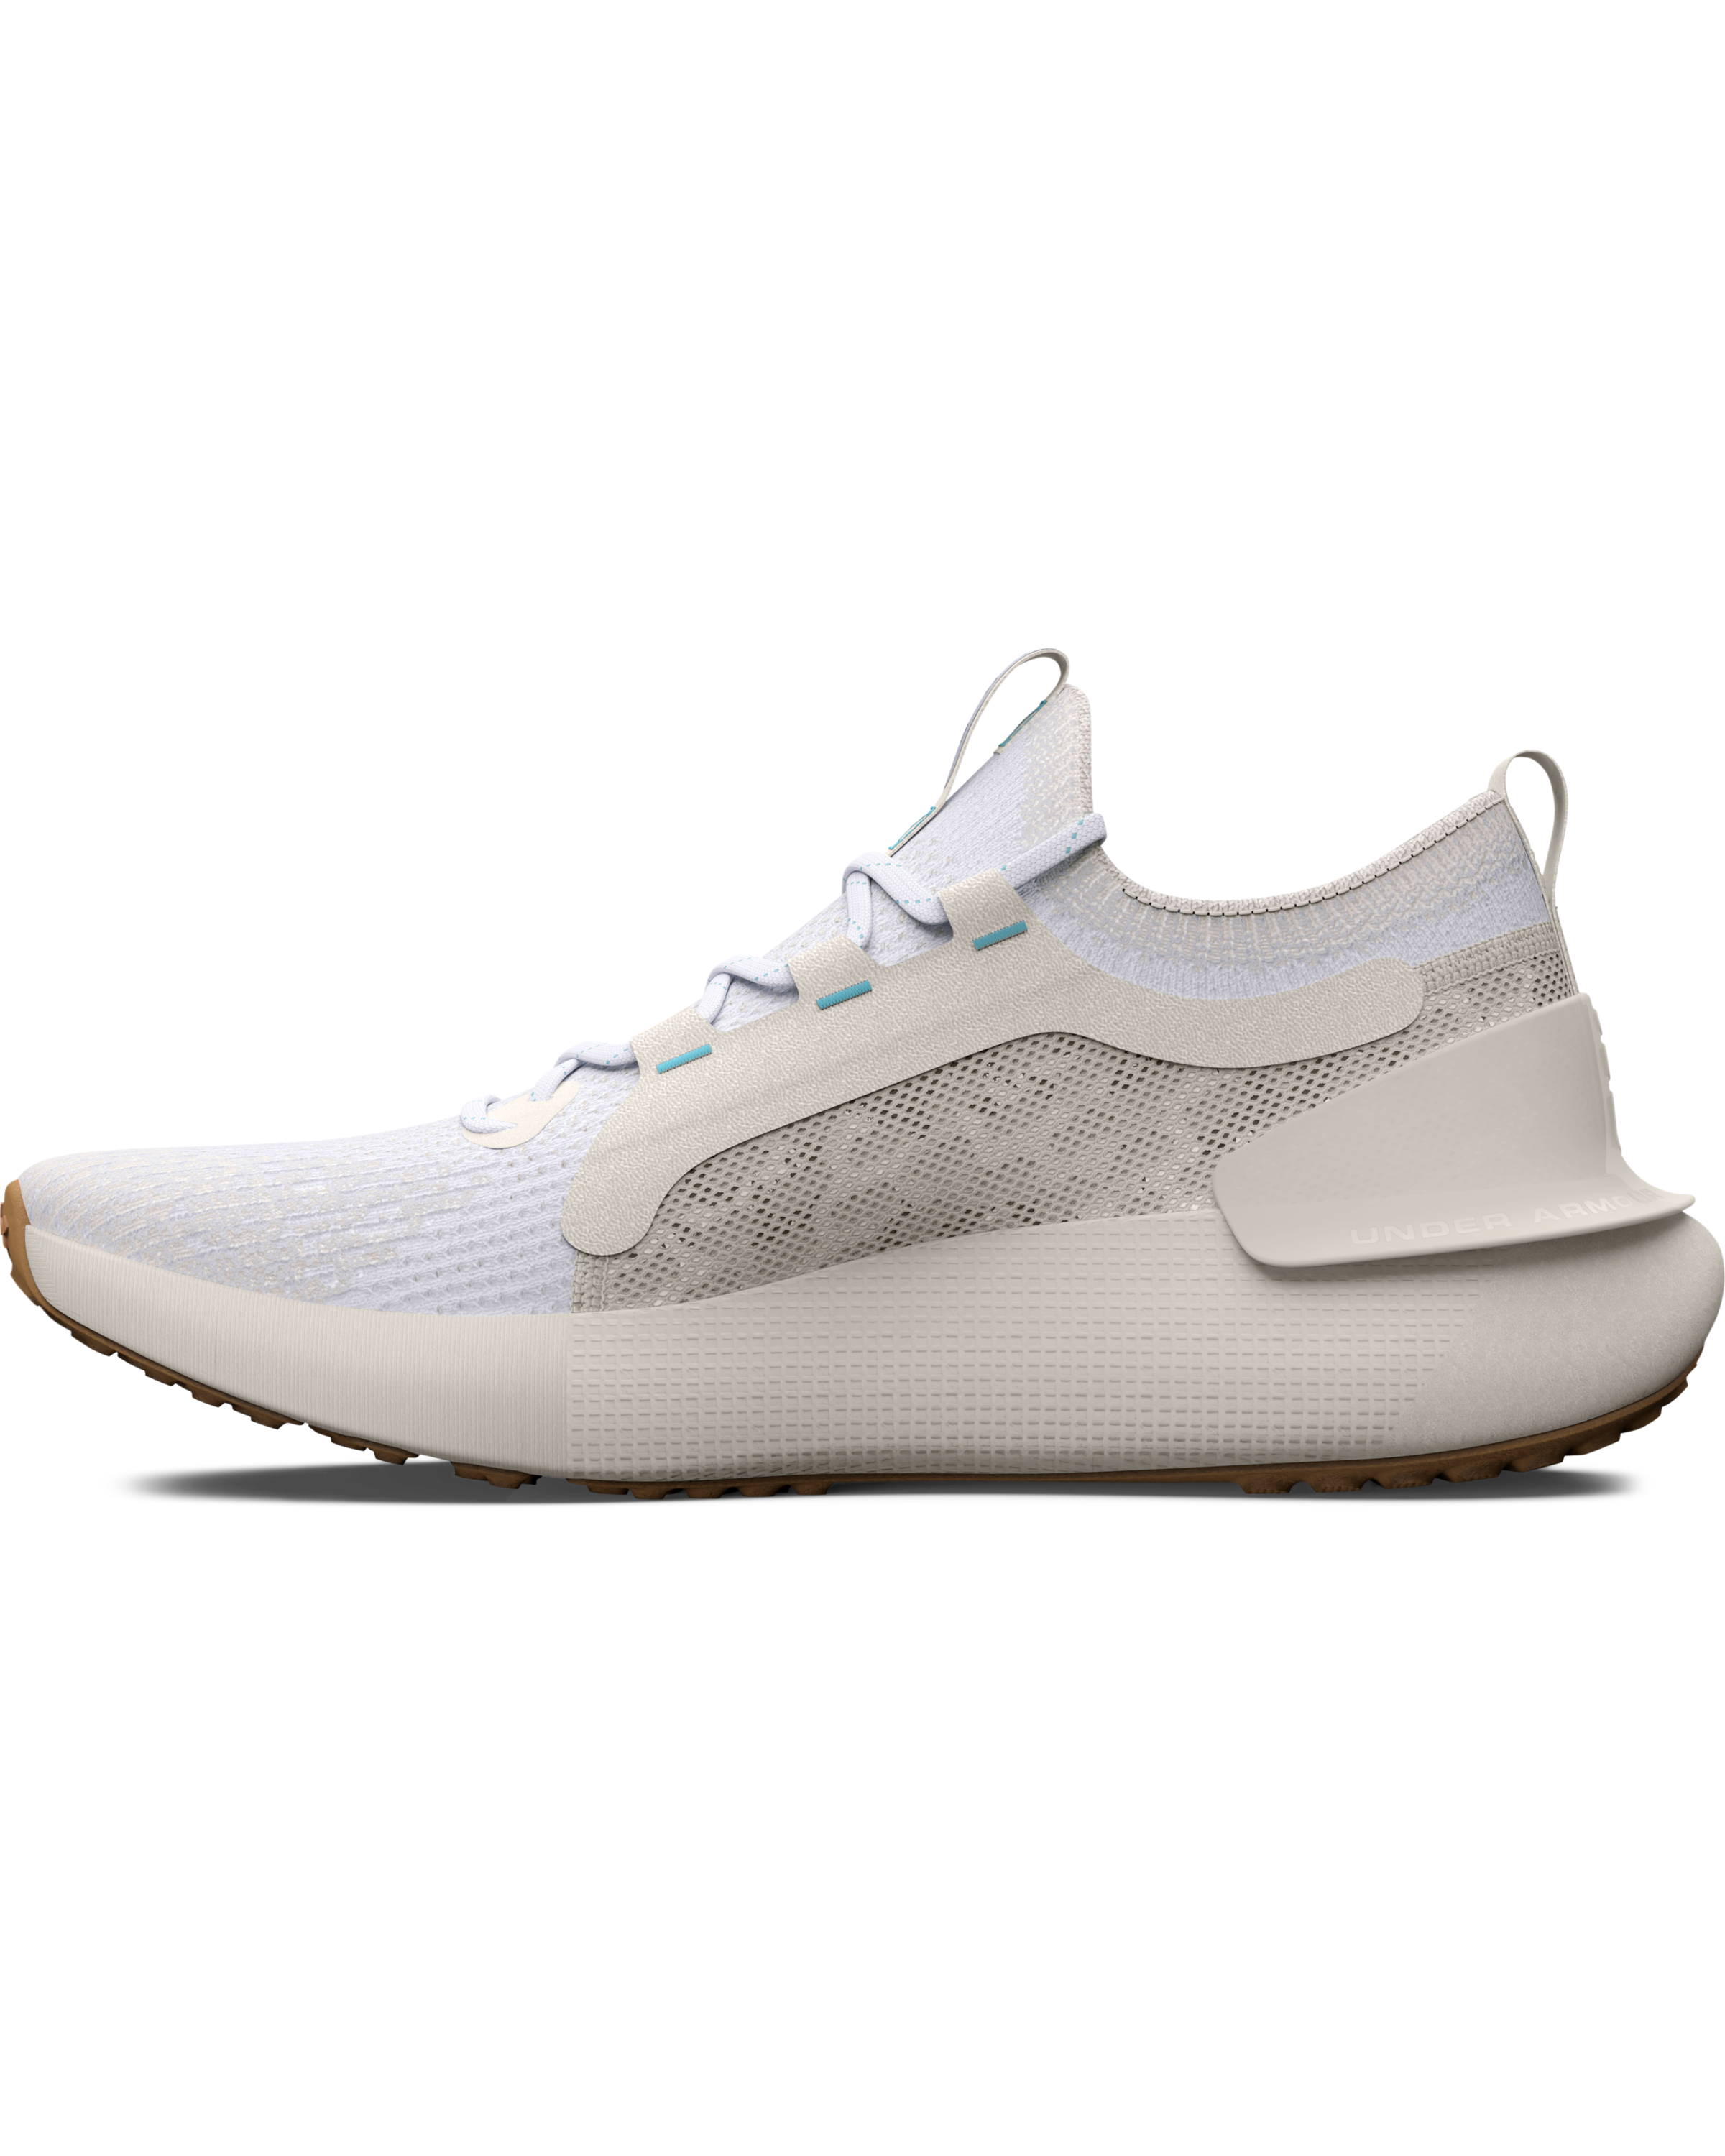 Women's HOVR Phantom 3 SE Elevate Running Shoes from Under Armour